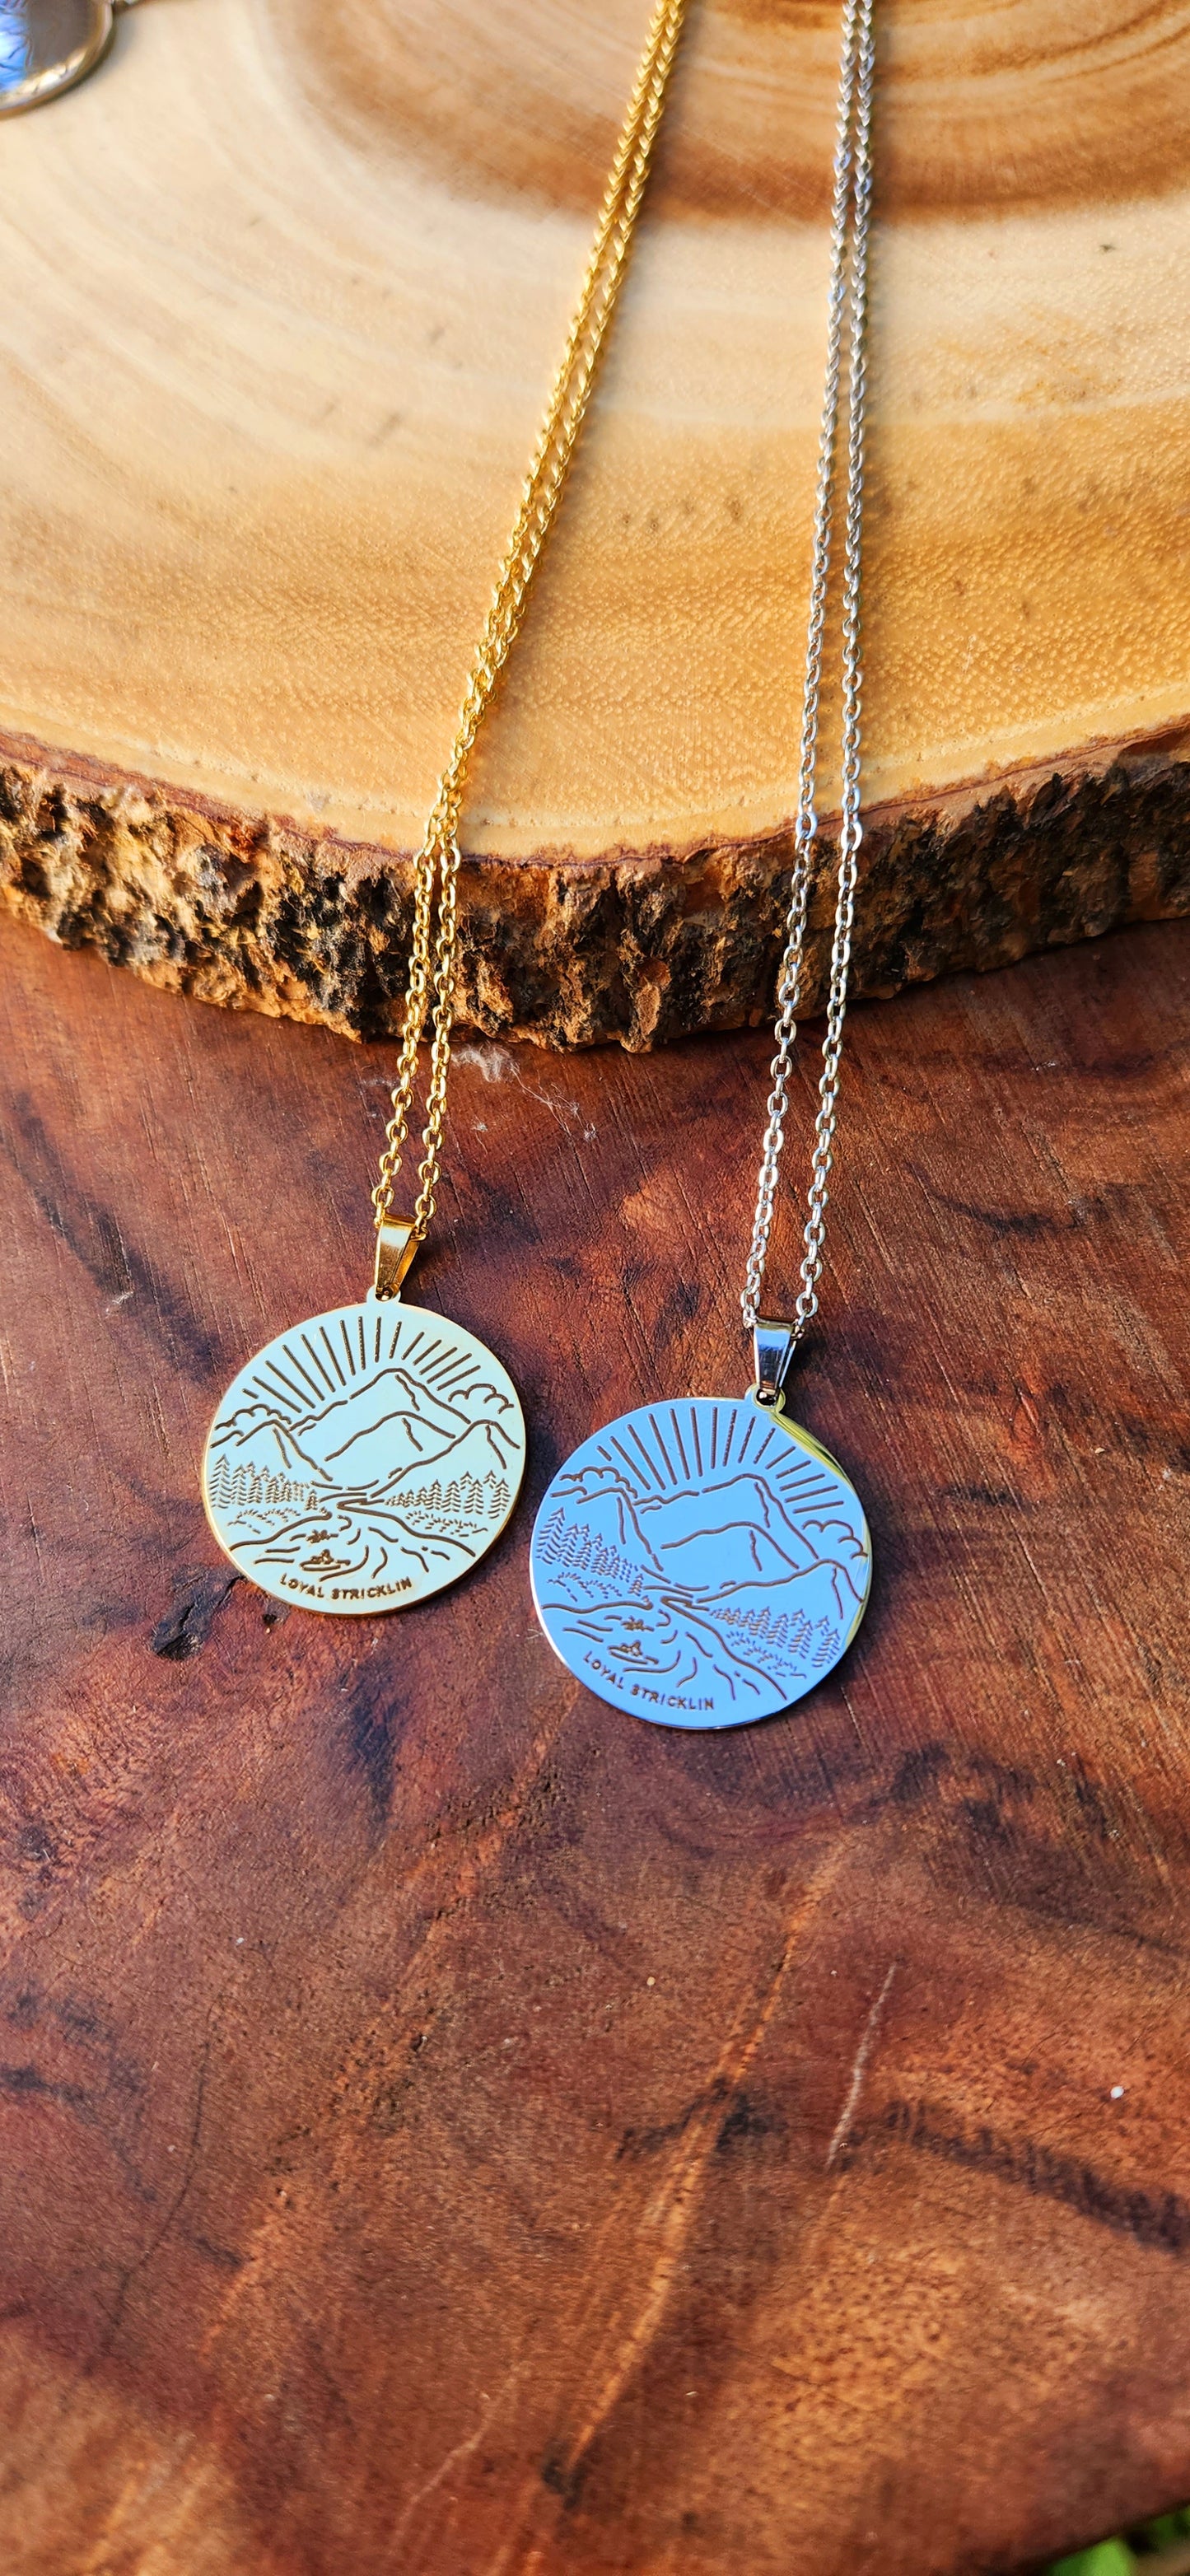 The mountains river necklace